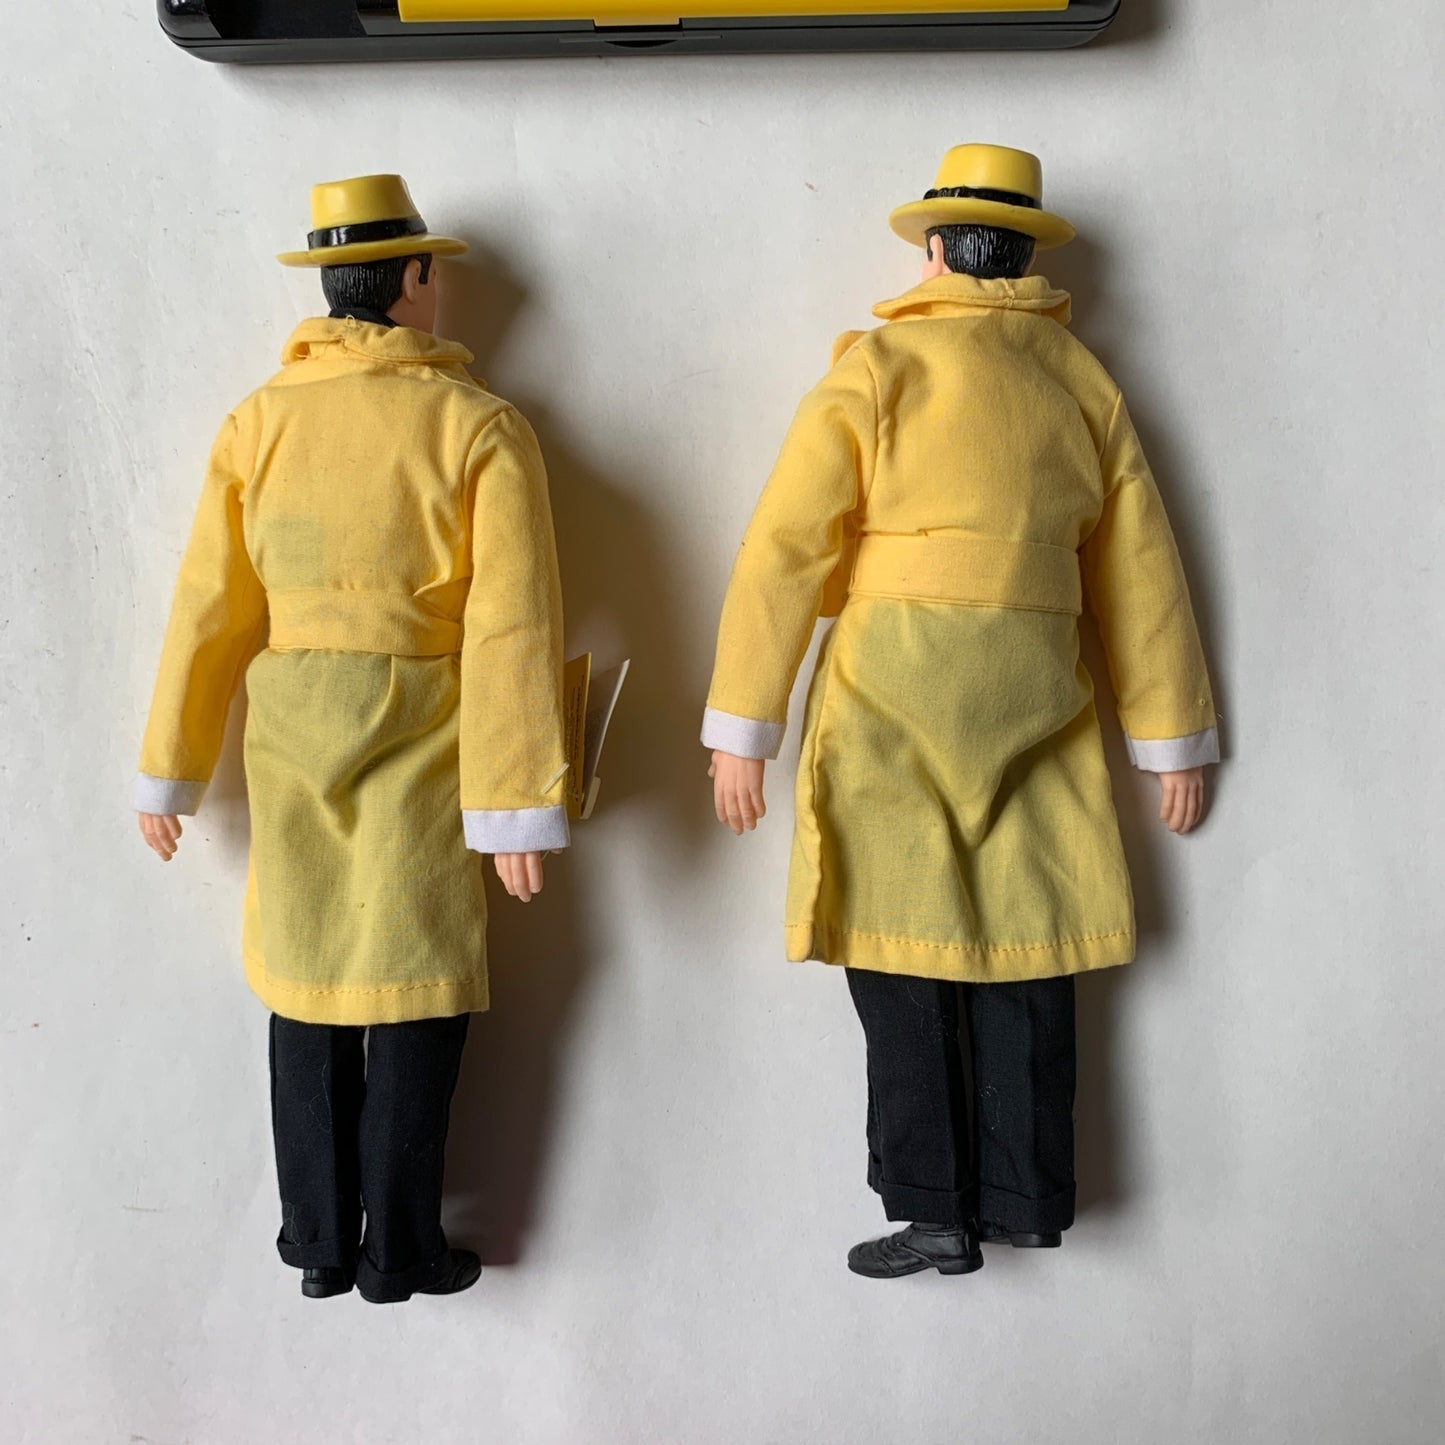 Dick Tracy Applause Vinyl Figures Lot of 2 Plus Accessory Box